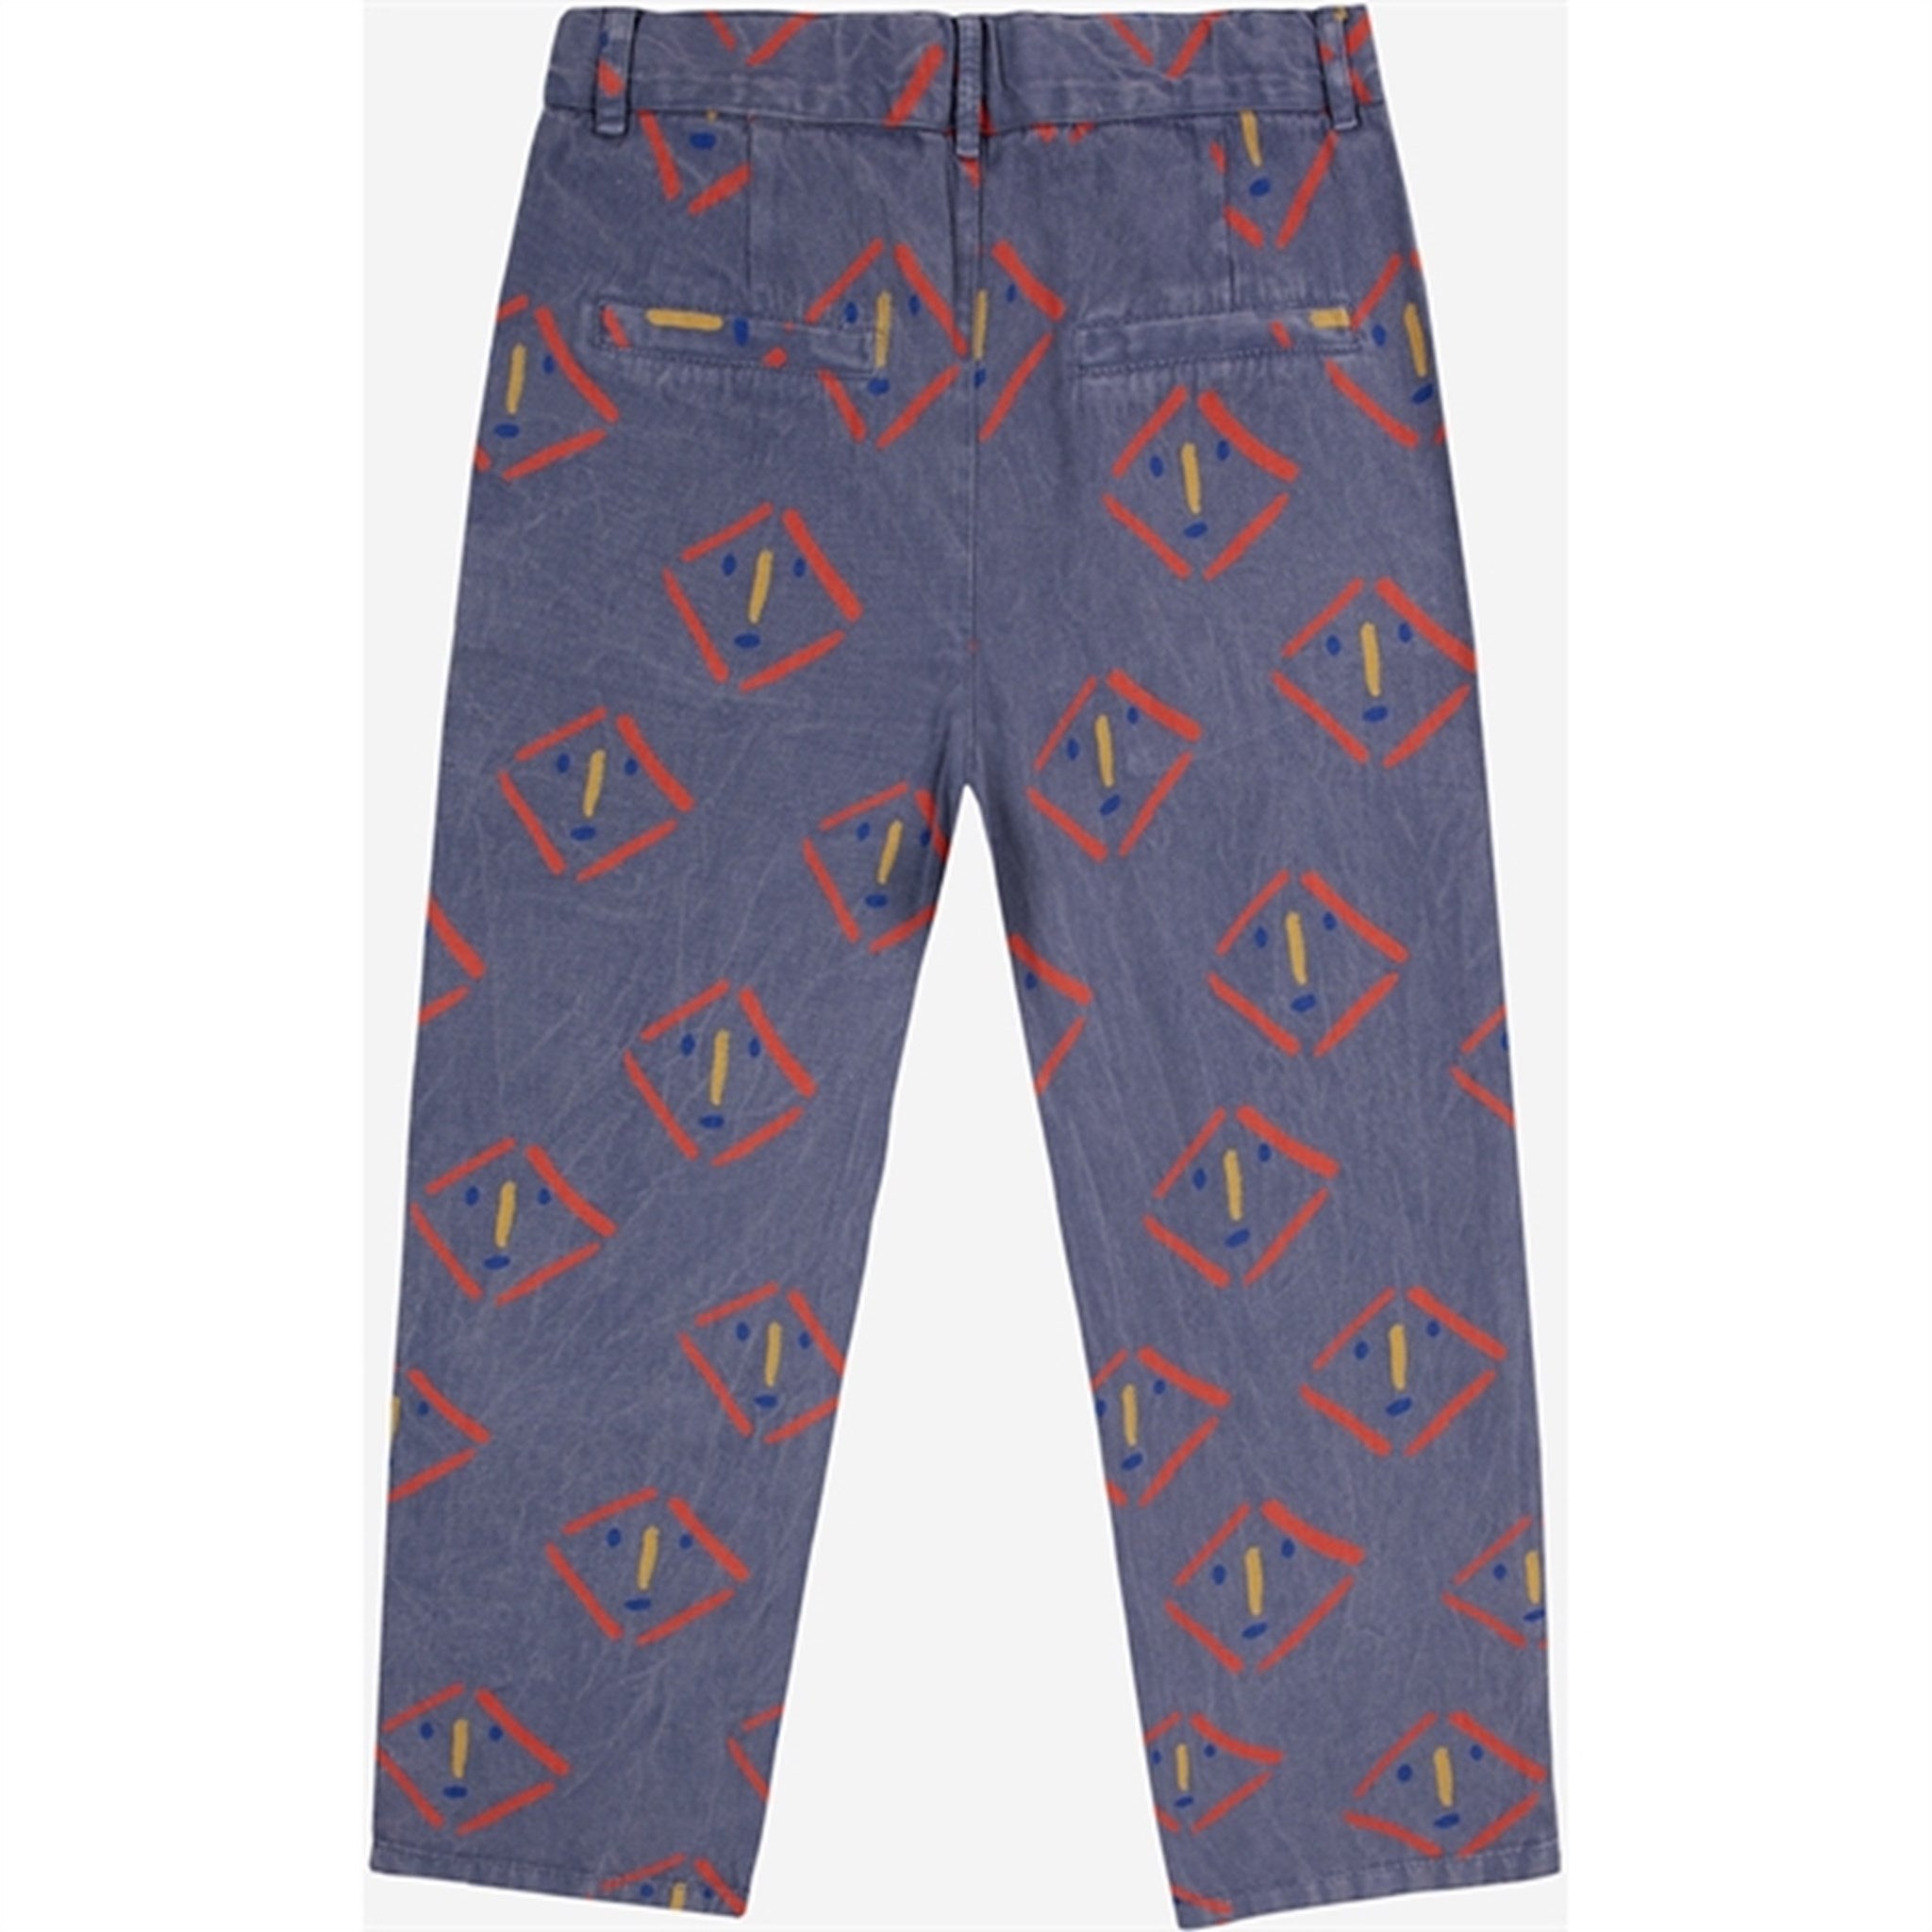 Bobo Choses Masks All Over Chino Bukser Prussian Blue 2